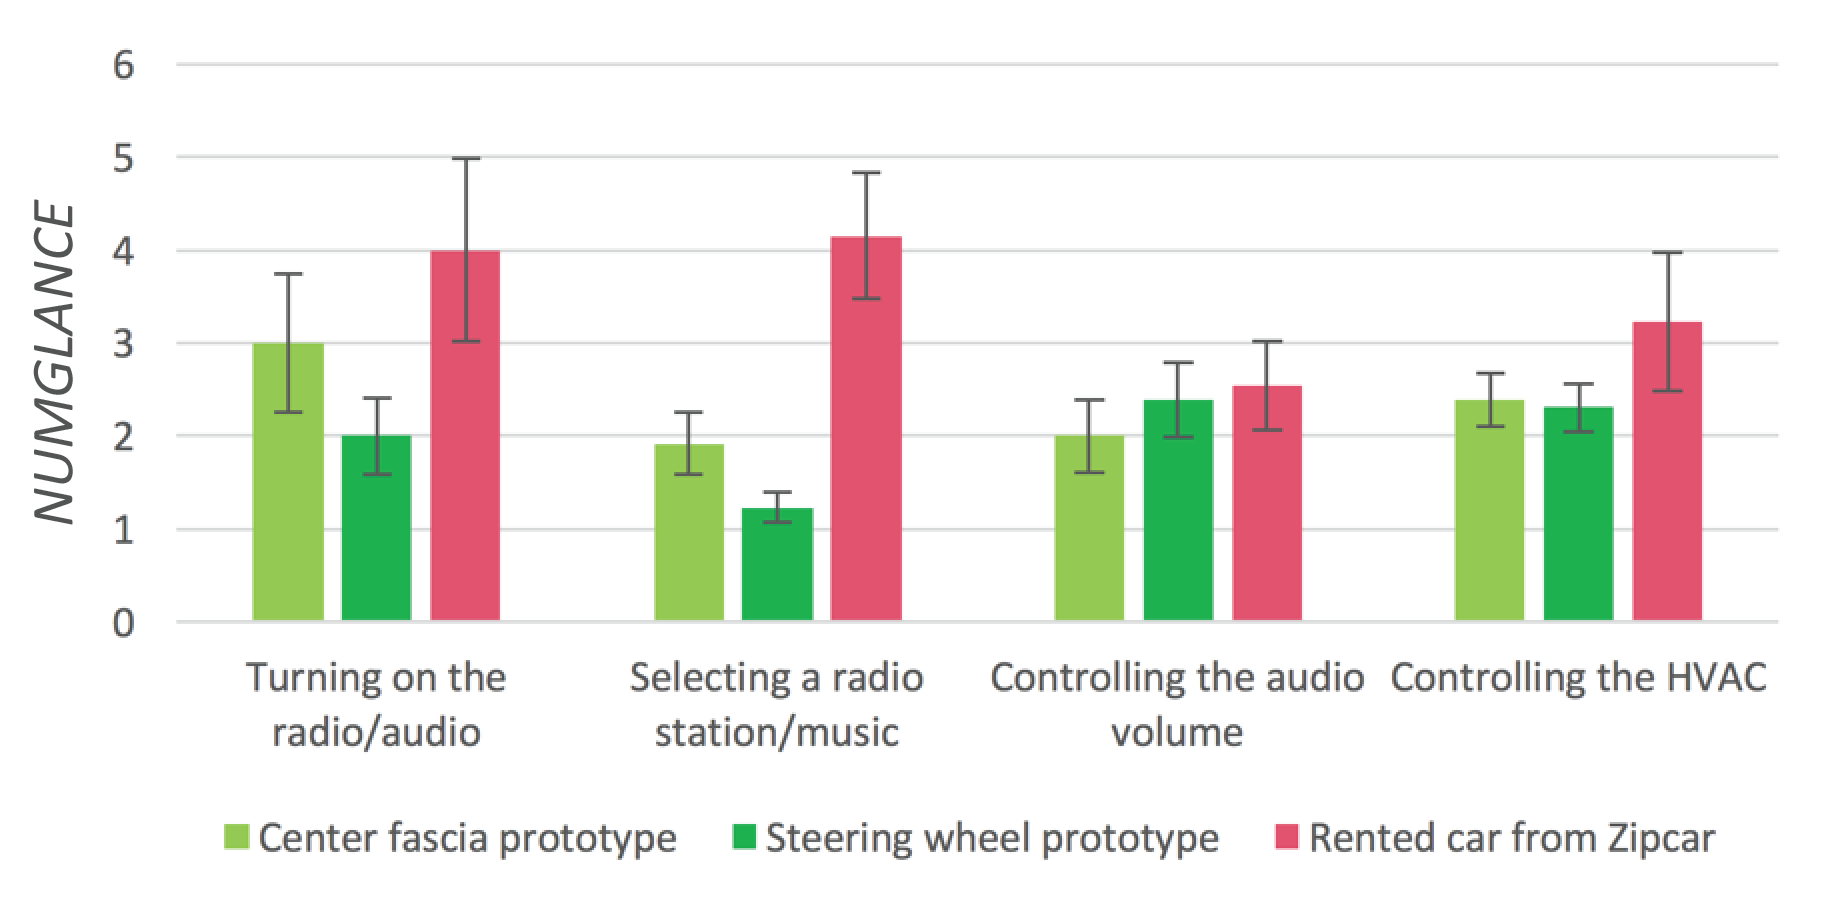 Bar graph showing that the number of glances for the rented car were higher than any other prototype tasks.